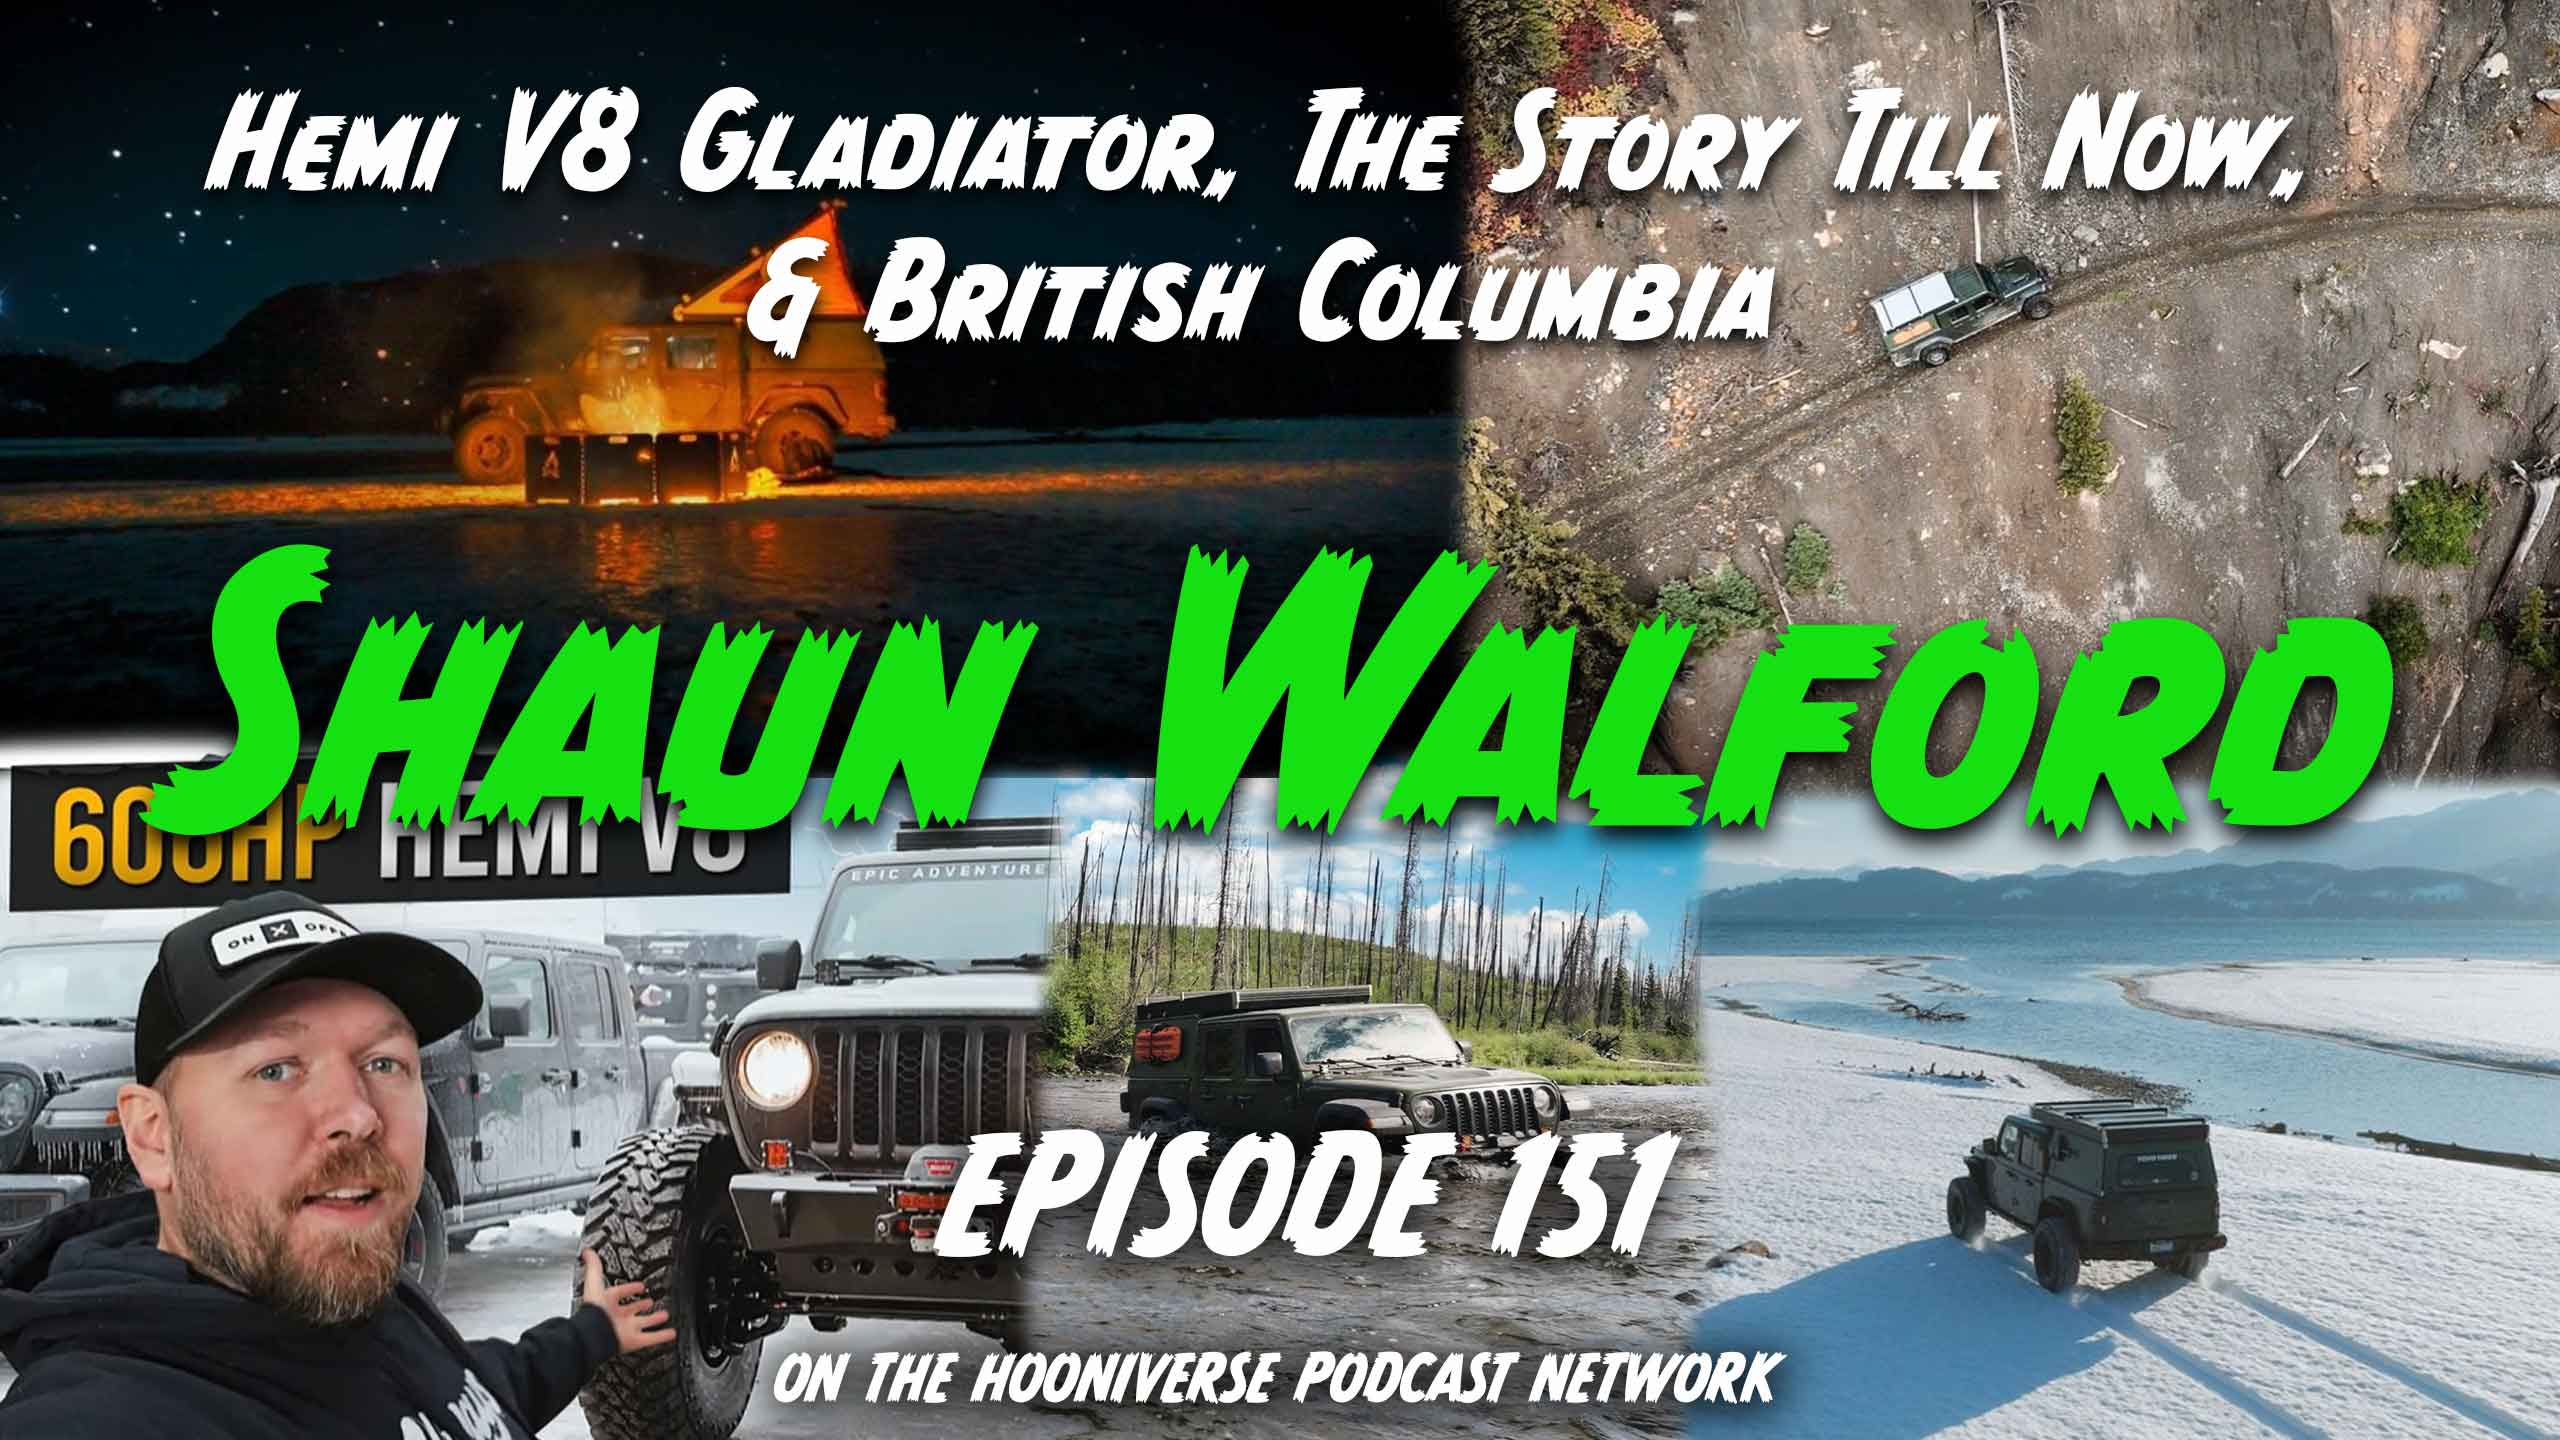 Shaun-Walford-V8-Gladiator-The-Story-Till-Now-Off-The-Road-Again-Episode-151